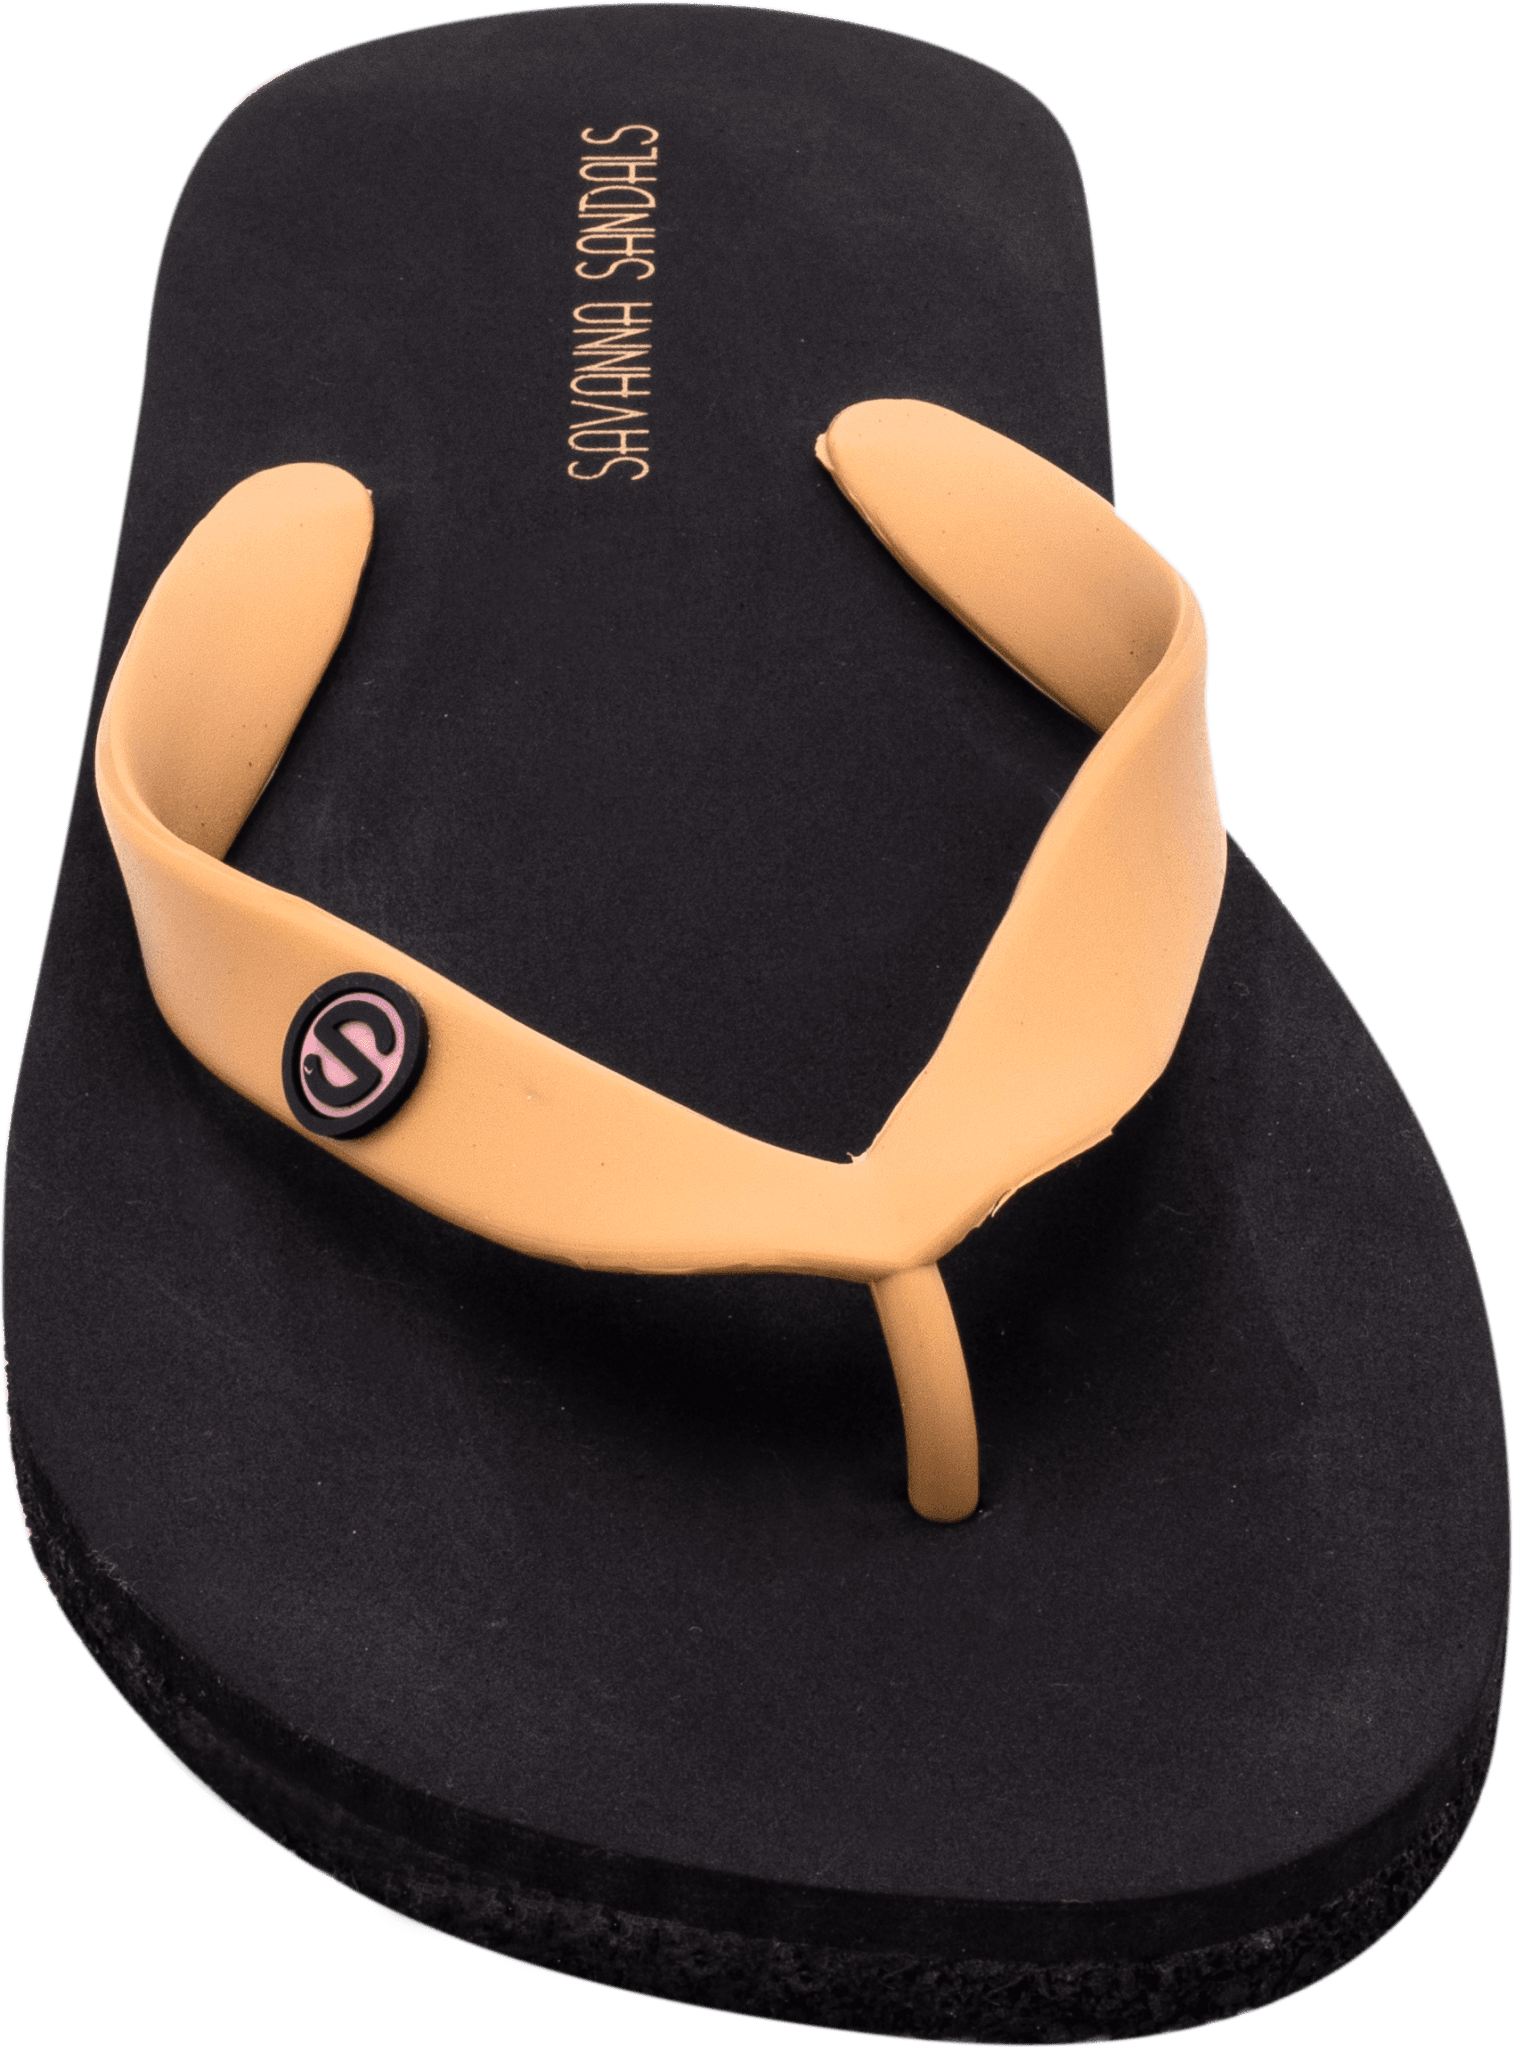 Men's Recycled Tire Rubber Flip Flops-Tancategory_Mens Accessories from Savanna Sandals - SHOPELEOS